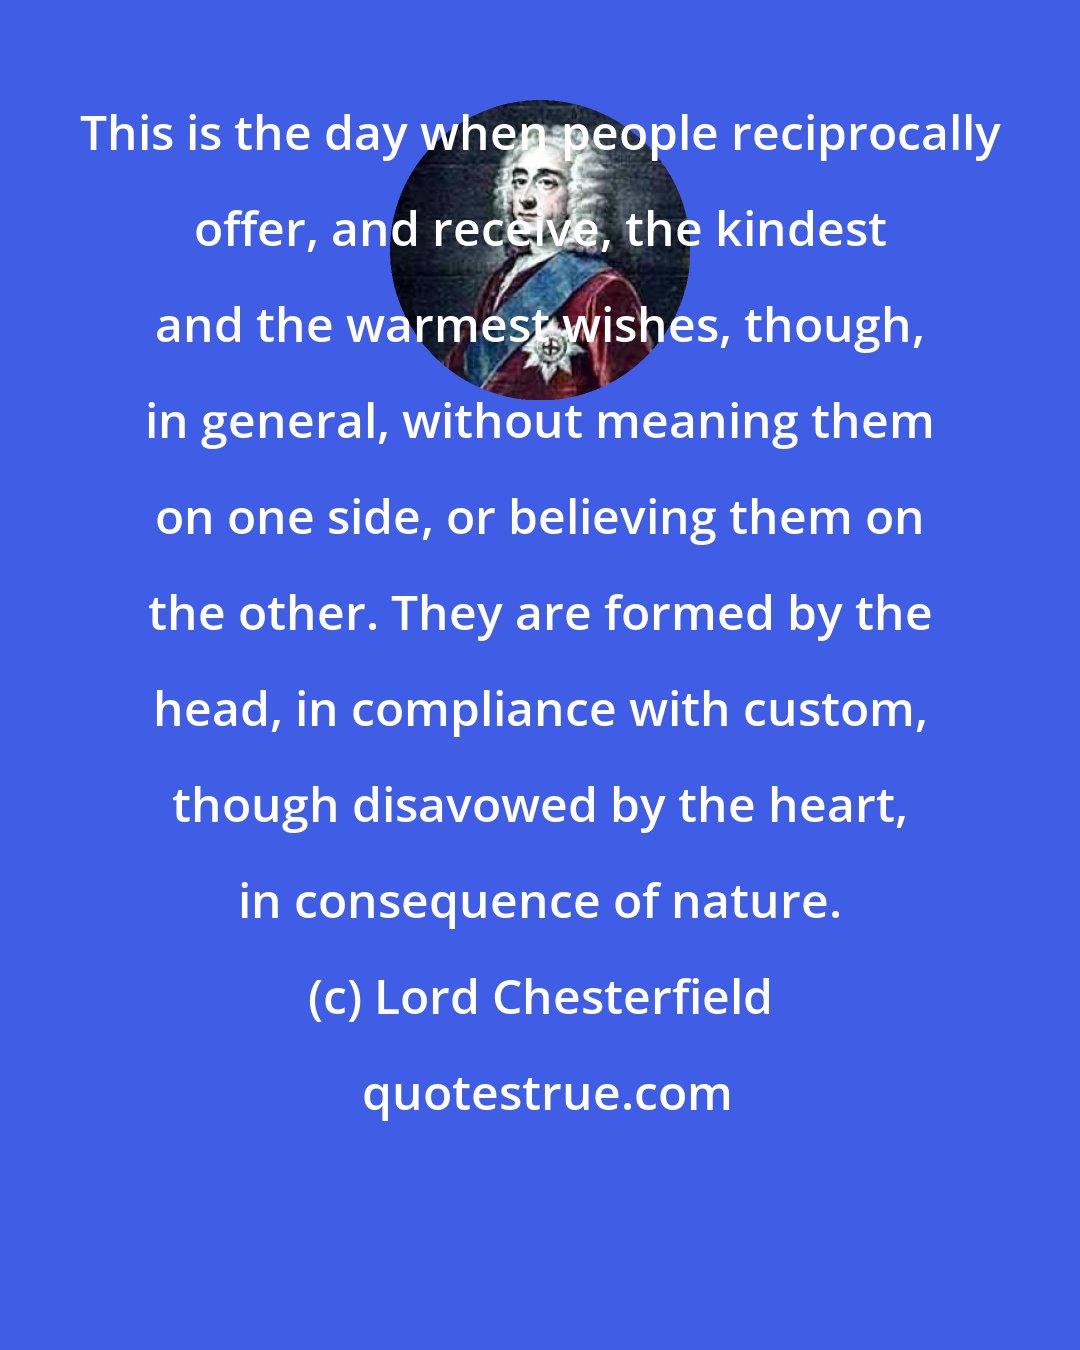 Lord Chesterfield: This is the day when people reciprocally offer, and receive, the kindest and the warmest wishes, though, in general, without meaning them on one side, or believing them on the other. They are formed by the head, in compliance with custom, though disavowed by the heart, in consequence of nature.